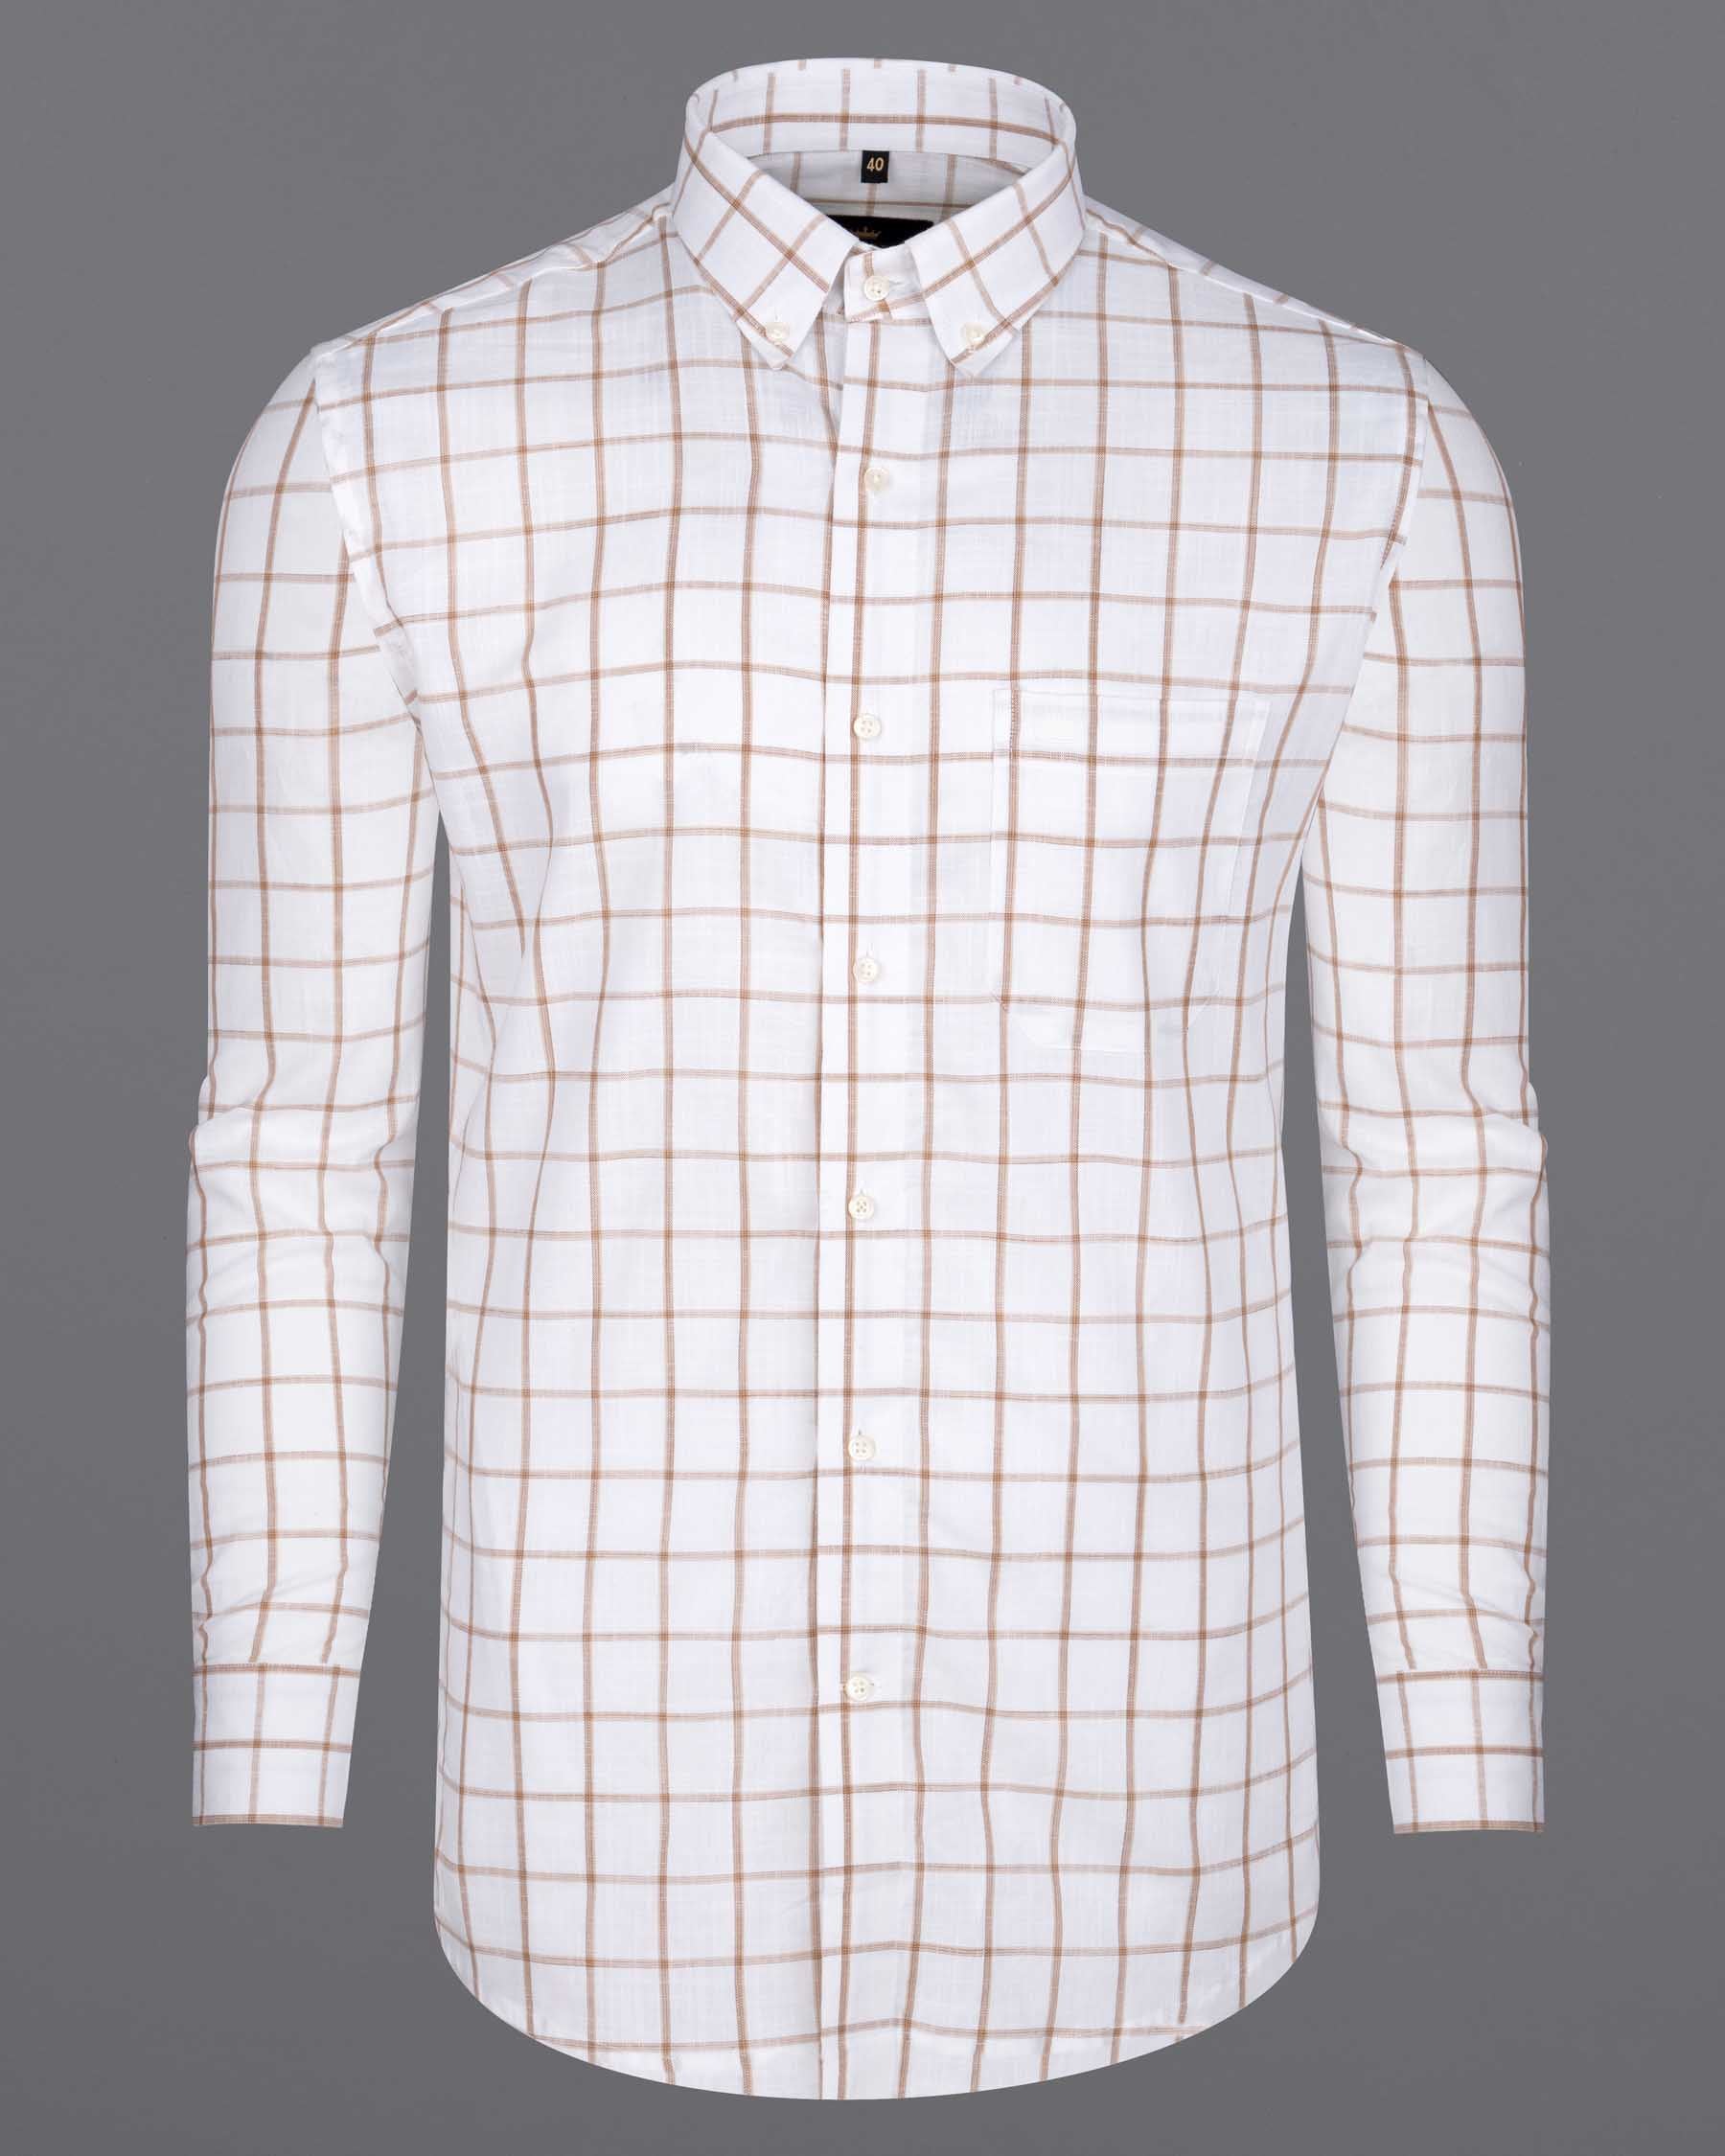 Bright white with brown Windowpane Luxurious Linen shirt 6287-BD-38, 6287-BD-H-38, 6287-BD-39, 6287-BD-H-39, 6287-BD-40, 6287-BD-H-40, 6287-BD-42, 6287-BD-H-42, 6287-BD-44, 6287-BD-H-44, 6287-BD-46, 6287-BD-H-46, 6287-BD-48, 6287-BD-H-48, 6287-BD-50, 6287-BD-H-50, 6287-BD-52, 6287-BD-H-52